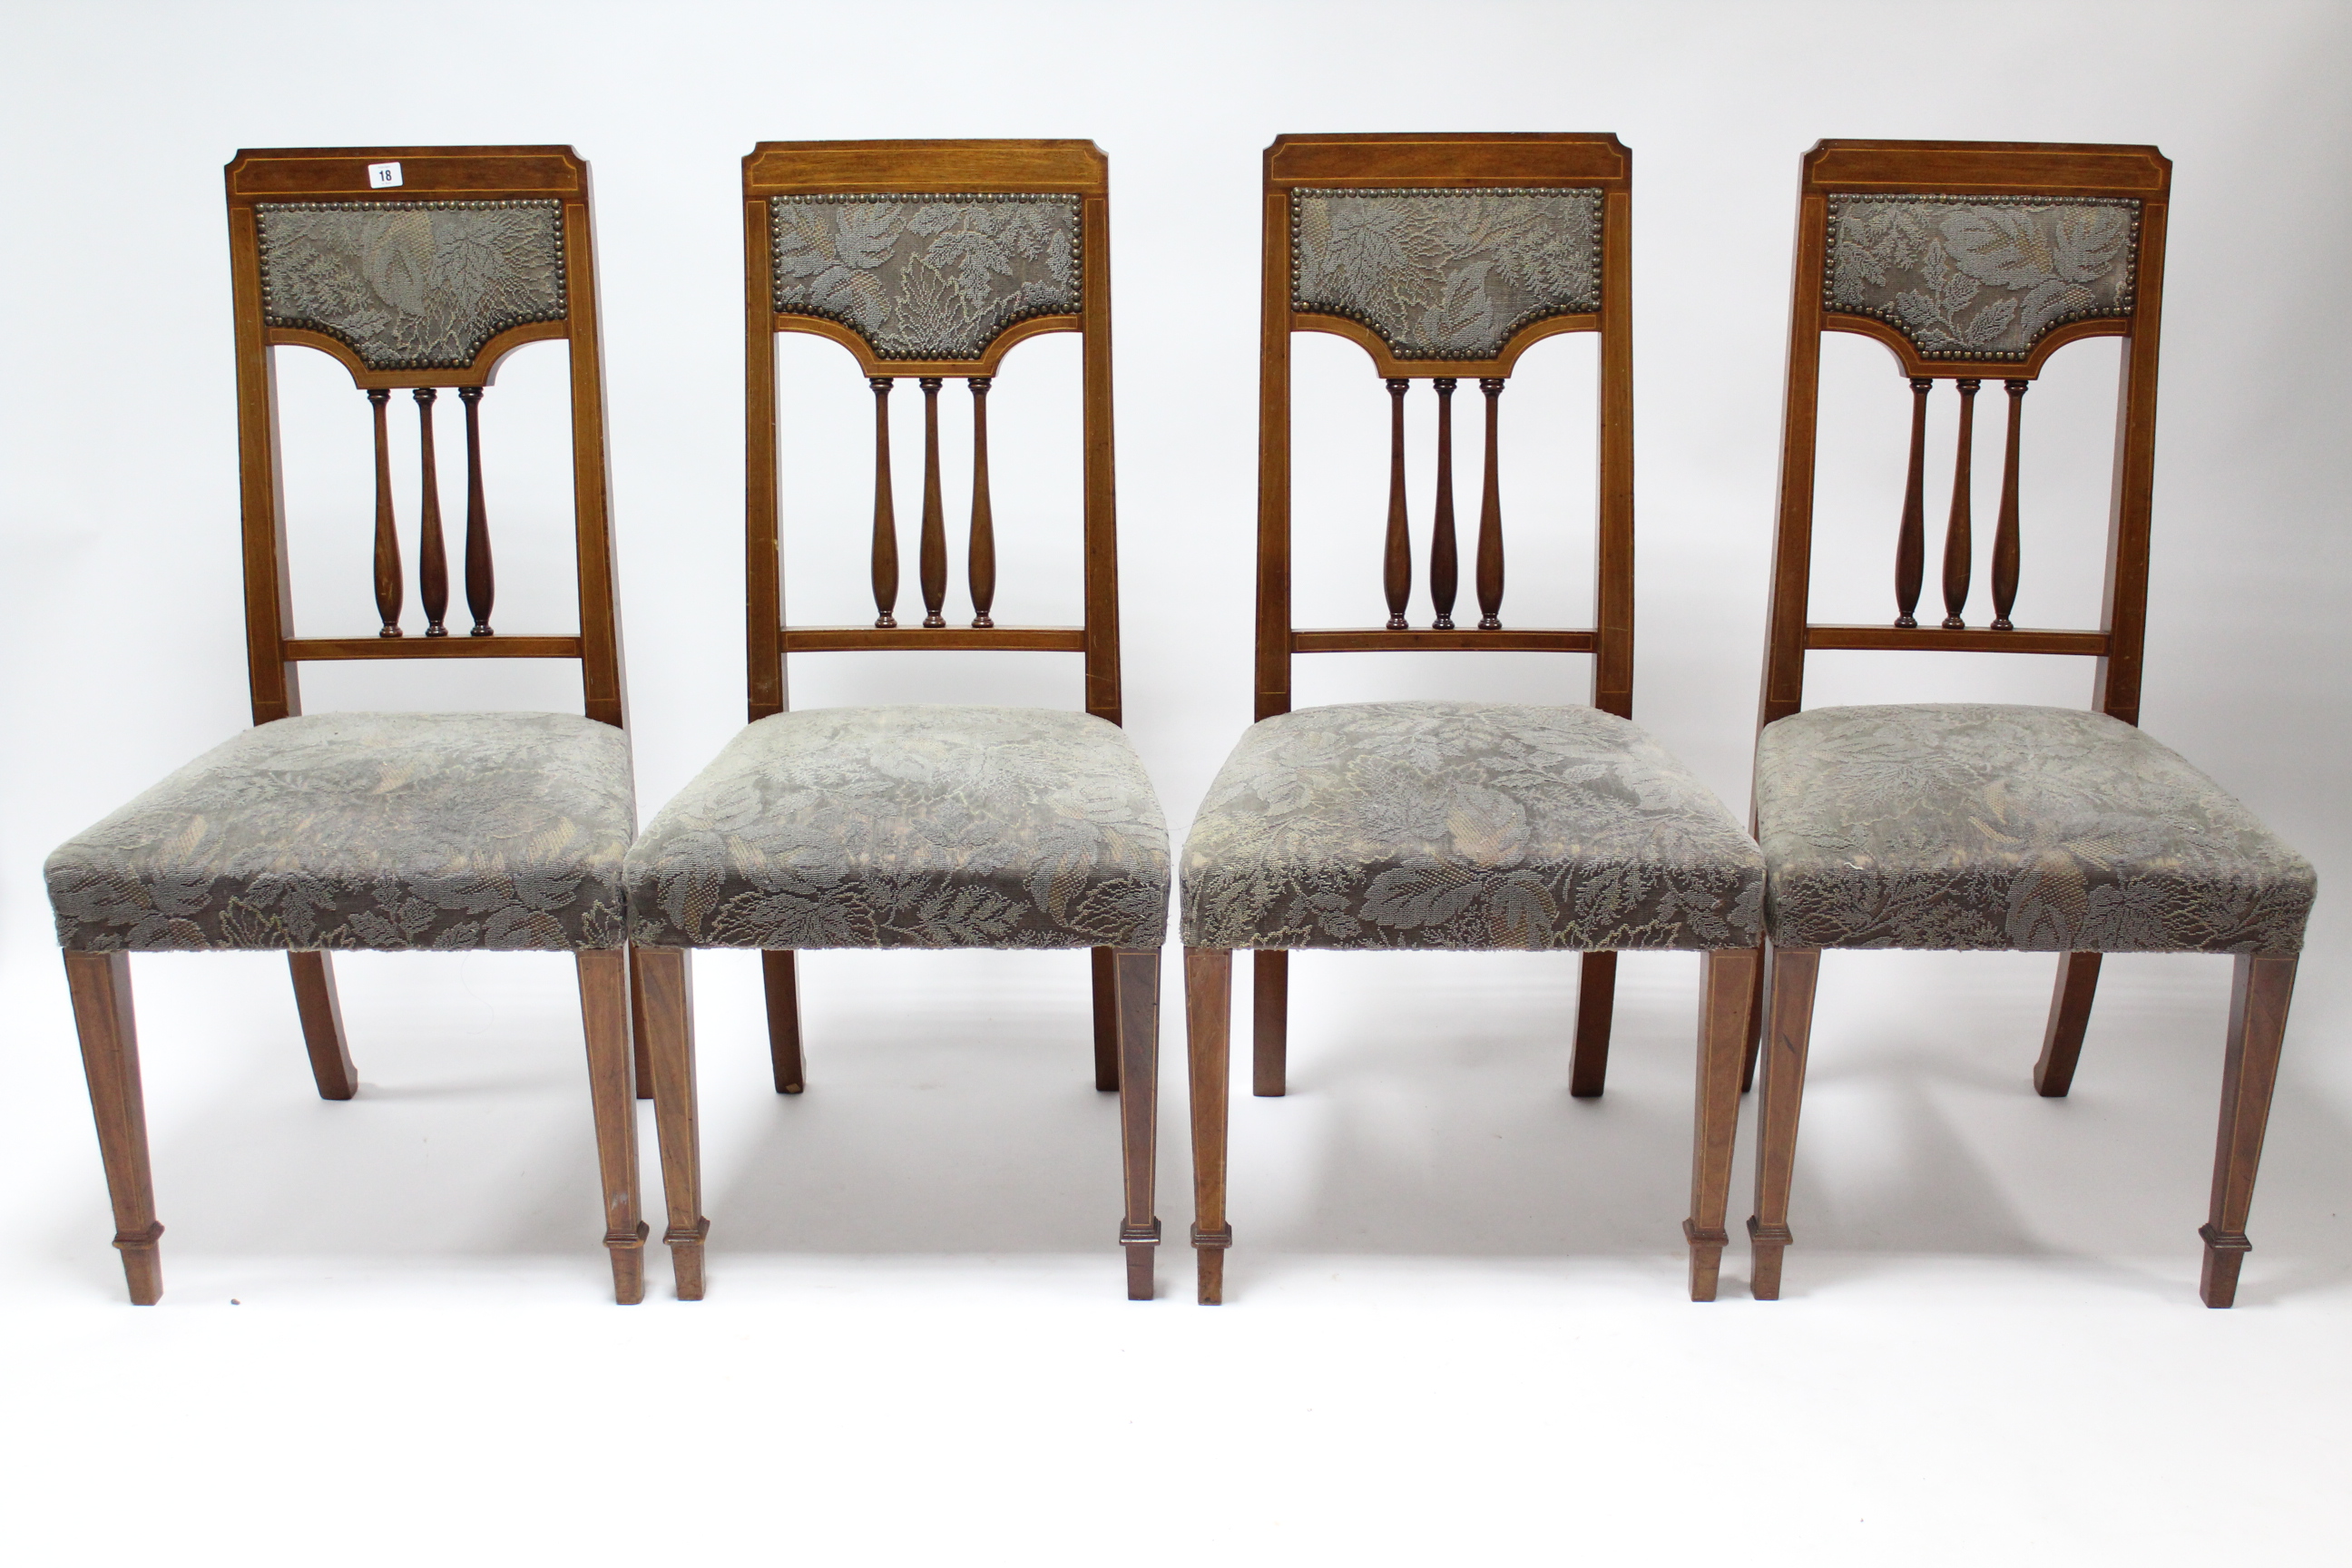 A set of four Edwardian inlaid-mahogany spindle-back dining chairs with sprung seats, & on square